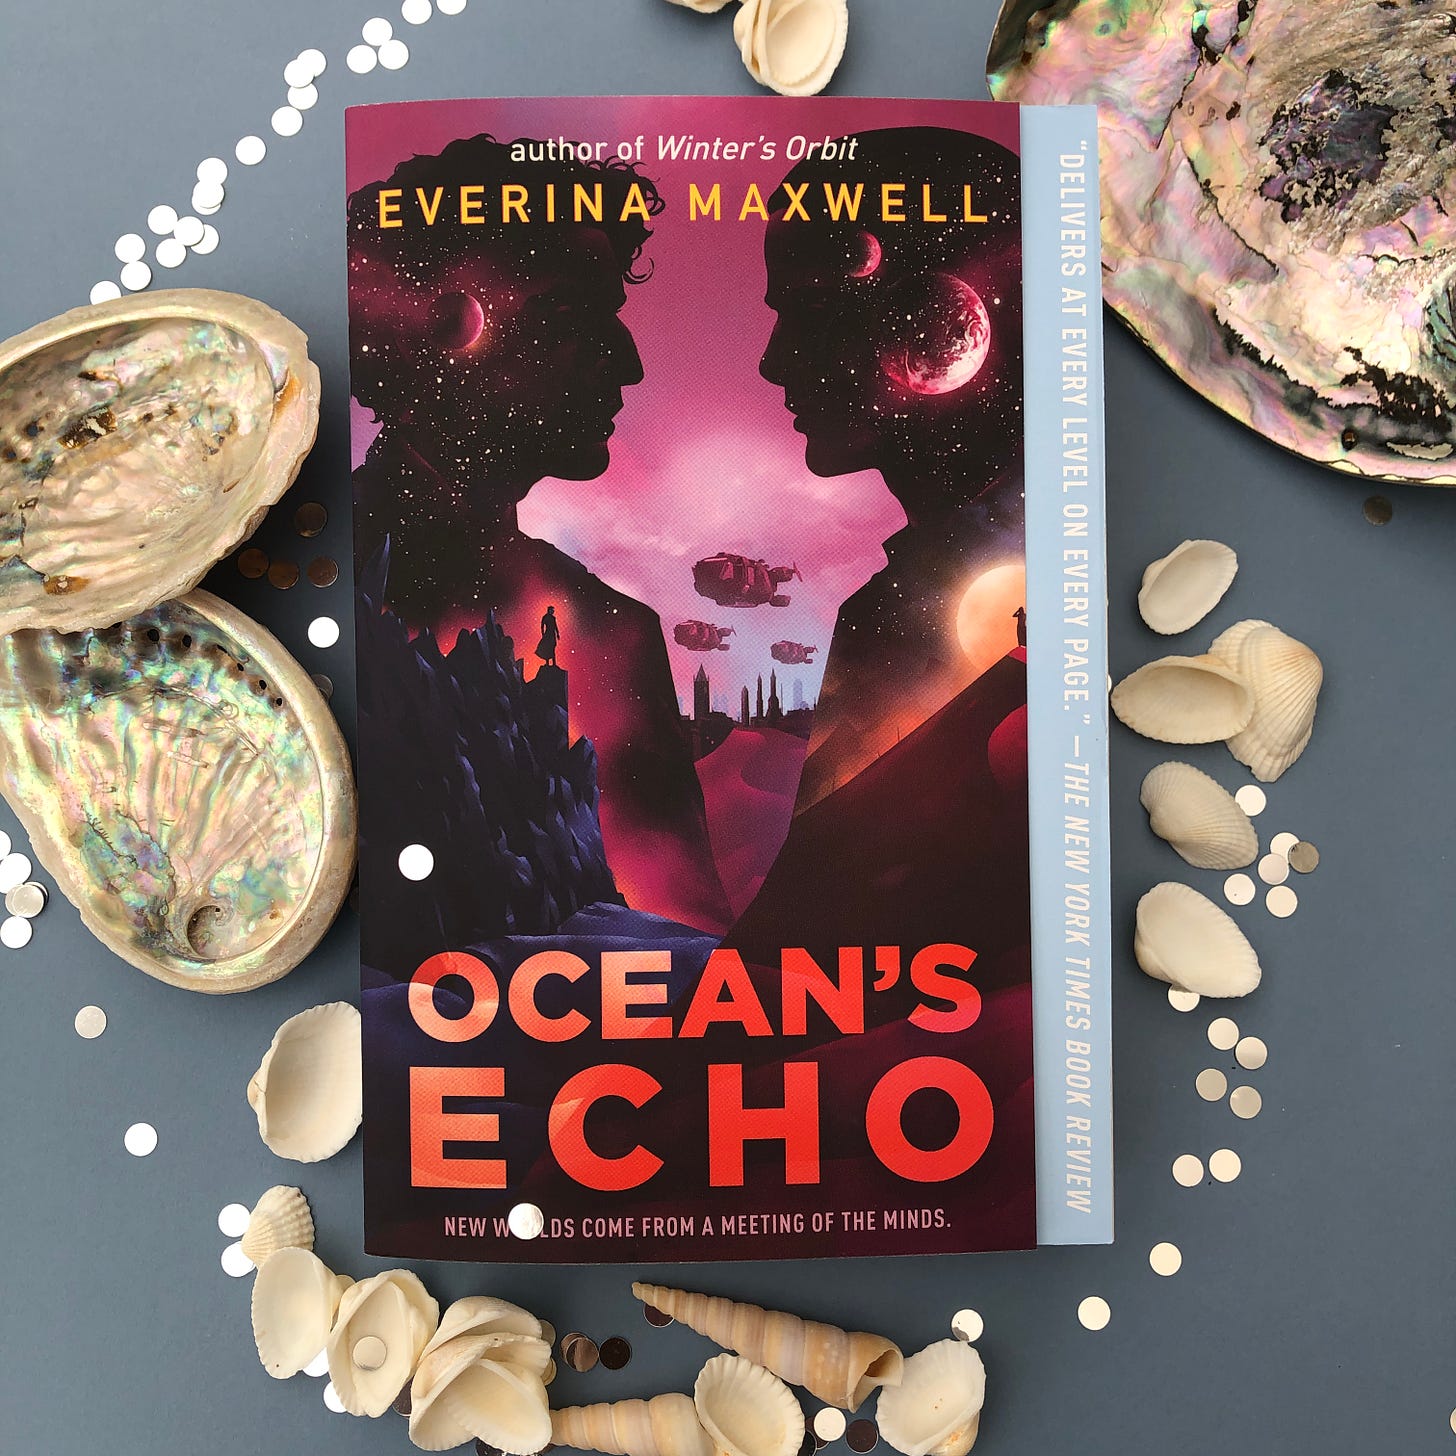 The paperback of Ocean's Echo surrounded by shells. The cover features two men facing each other over a purple and red futuristic city landscape.